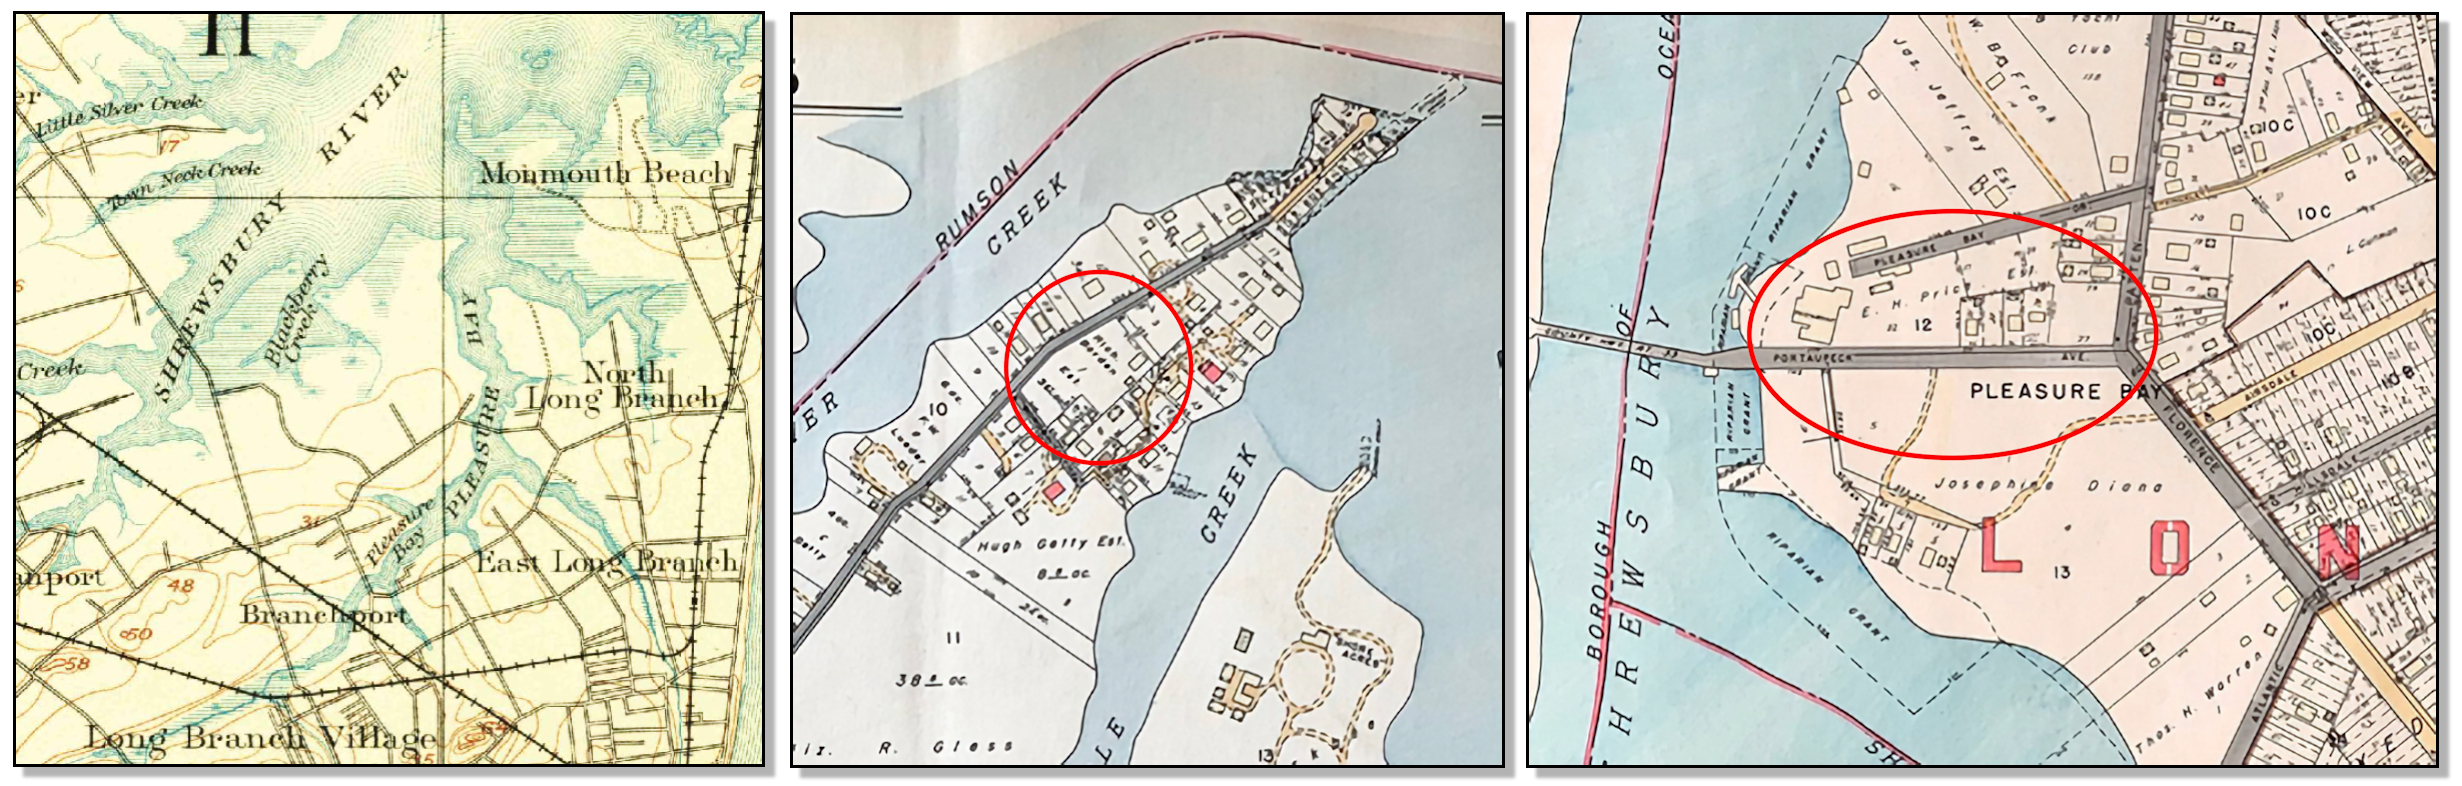 Maps showing Pleasure Bay and the approximate location of Borden's boardinghouse on Little Silver Point and Price's Hotel in Monmouth Beach.